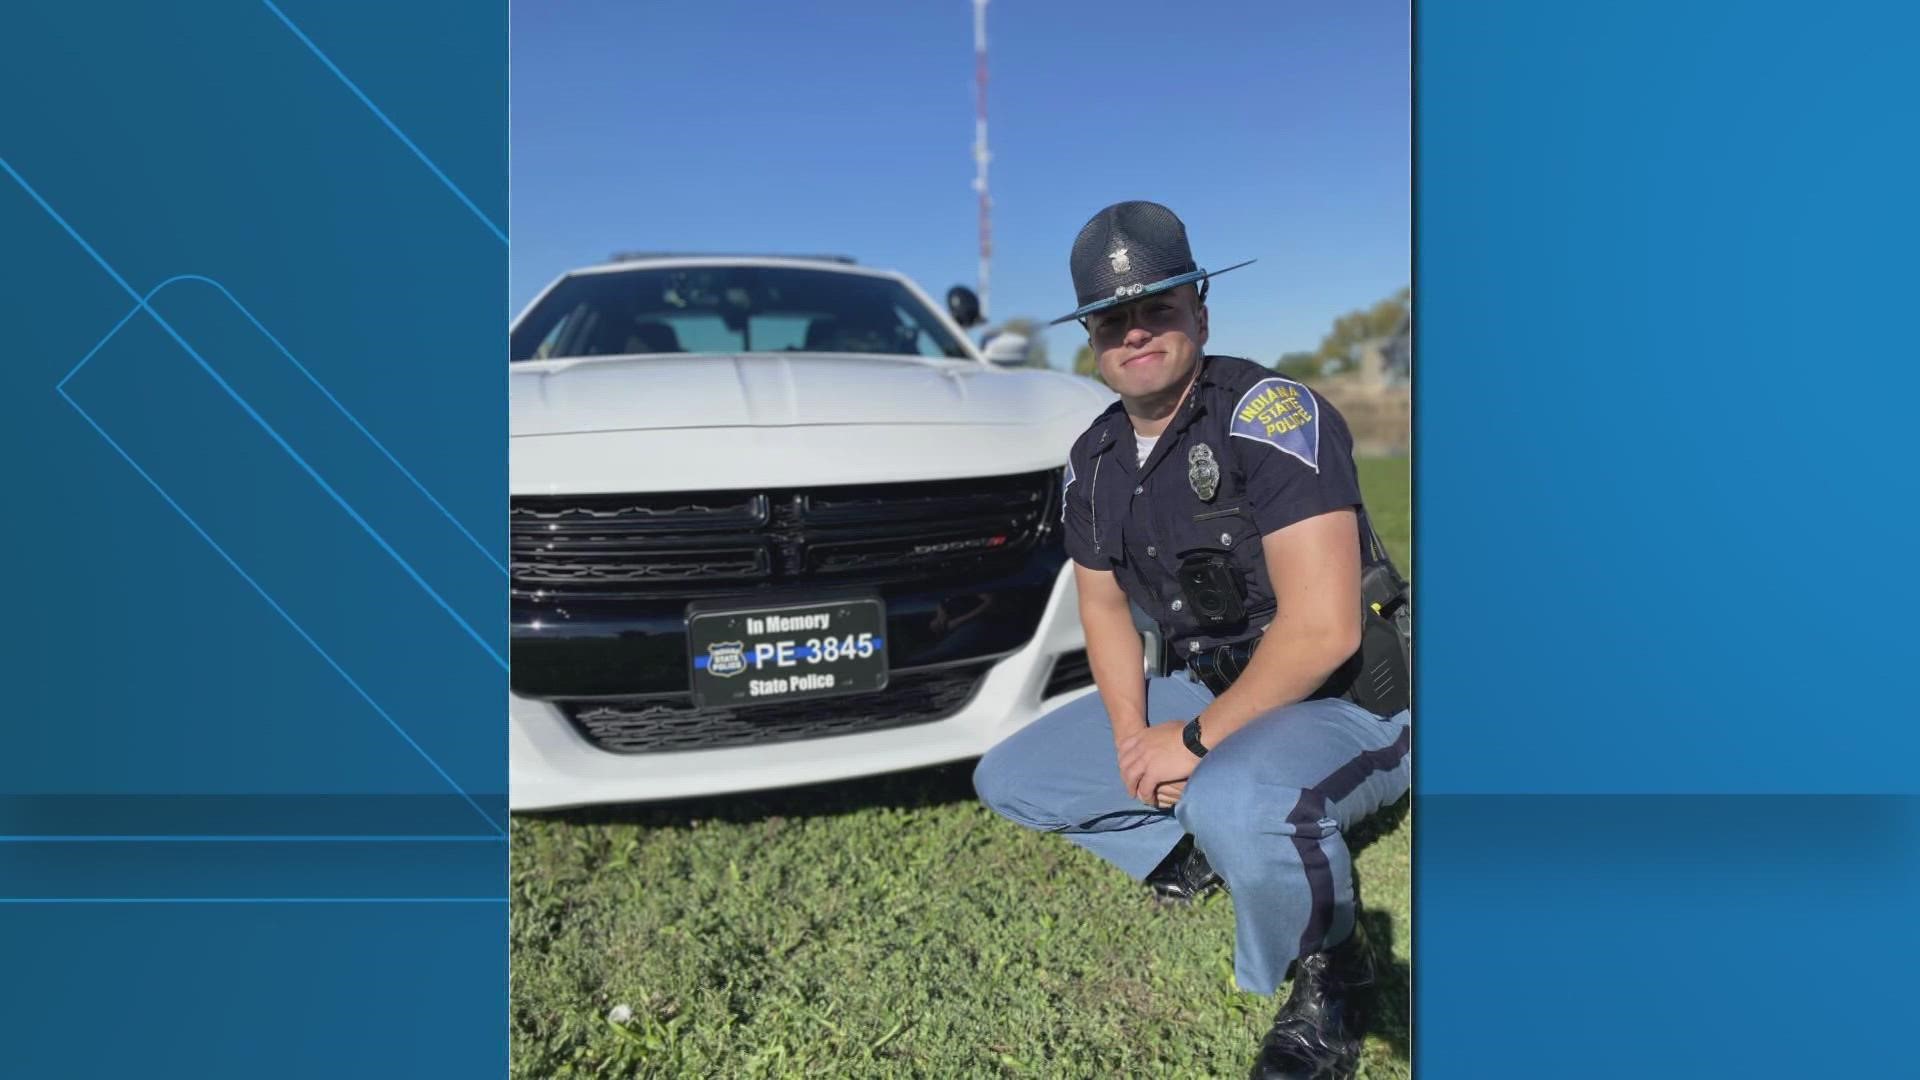 Payton Utterback, an Indiana State Police Trooper, recently graduated of ISP Academy the 82nd class - something he dreamed of when he was in first grade.